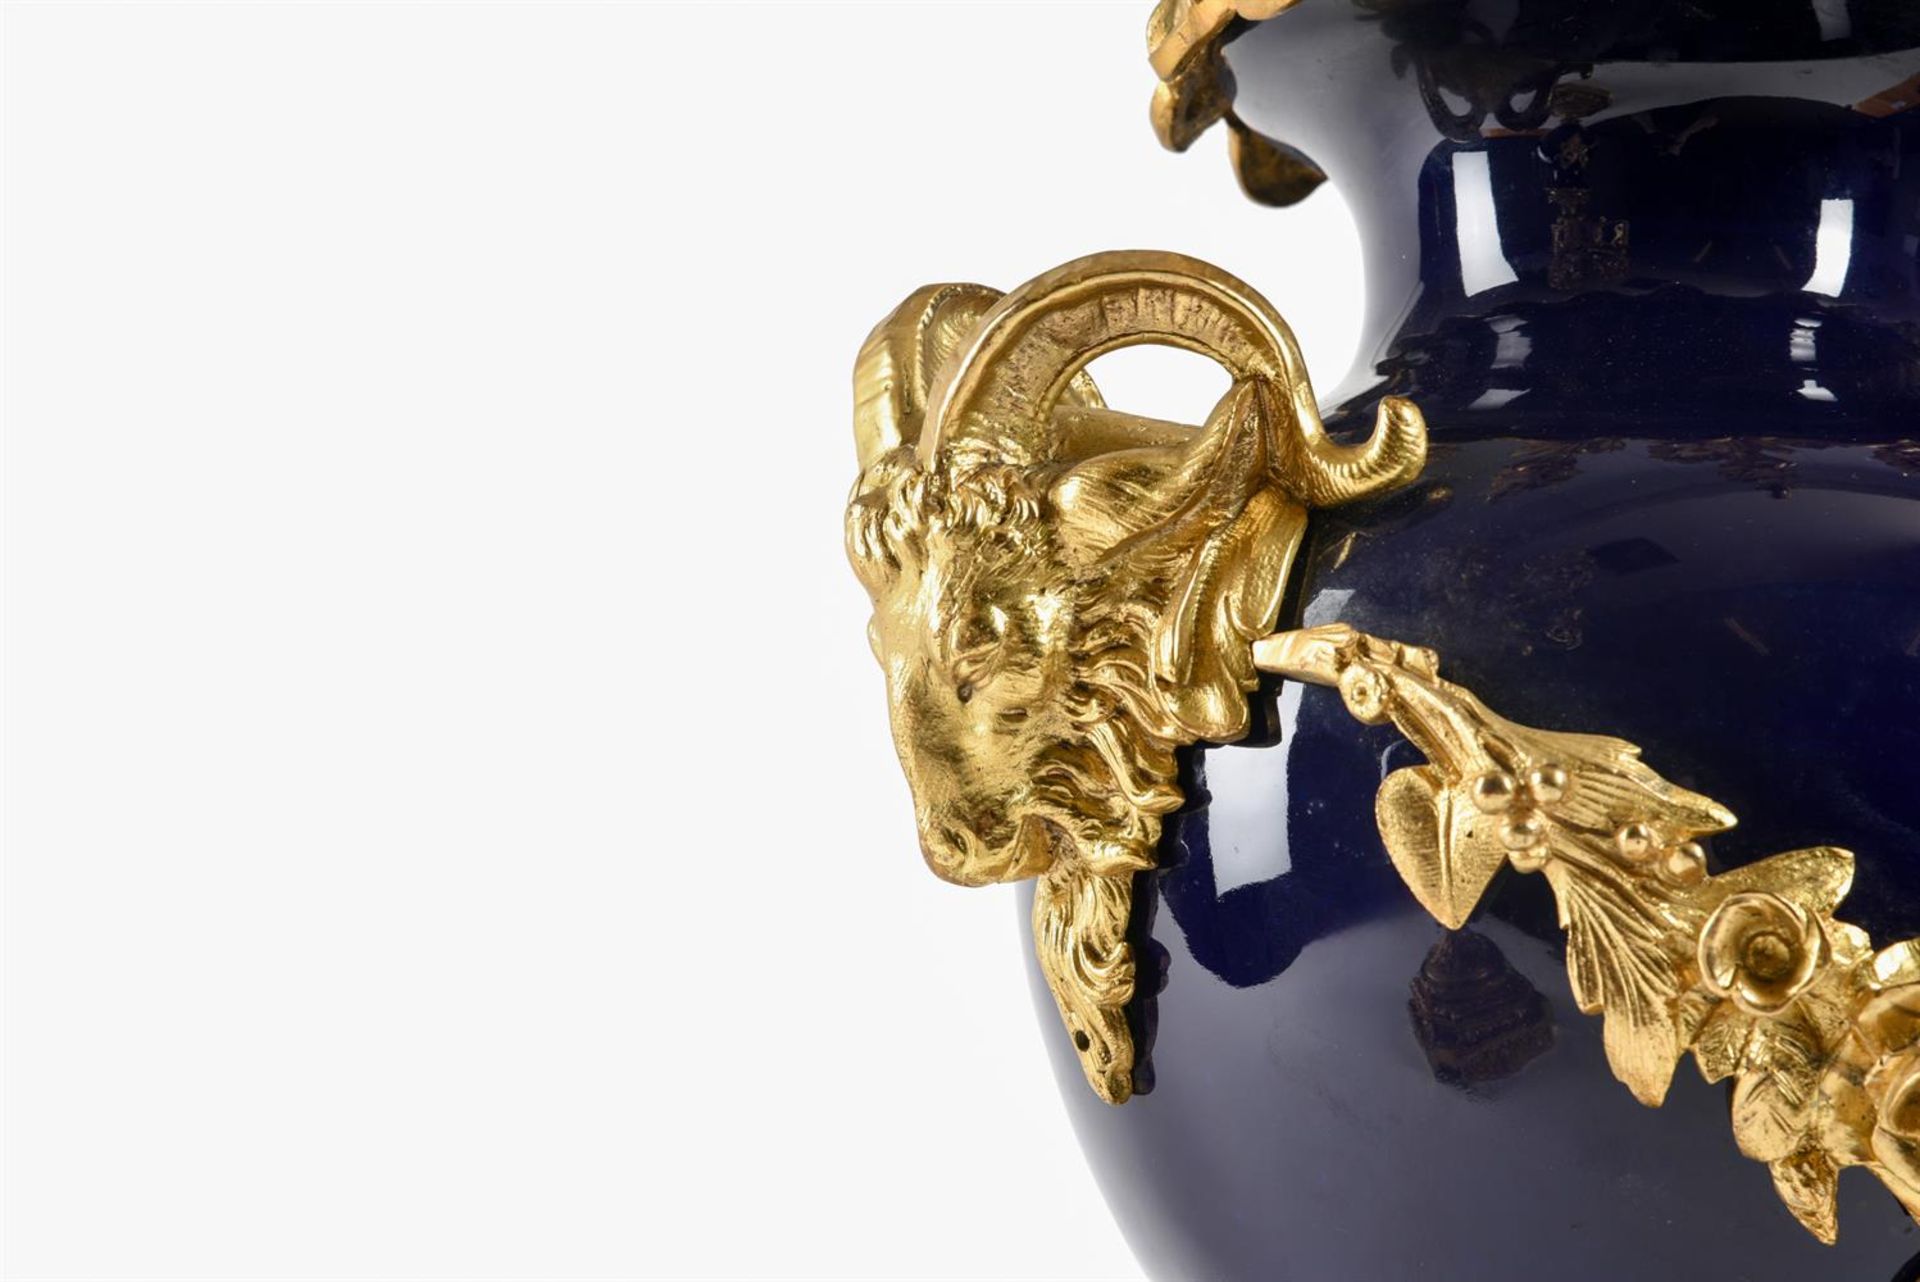 A PAIR OF ORMOLU MOUNTED BLUE PORCELAIN TEN LIGHT URN CANDELABRA, FRENCH, EARLY 20TH CENTURY - Image 5 of 5